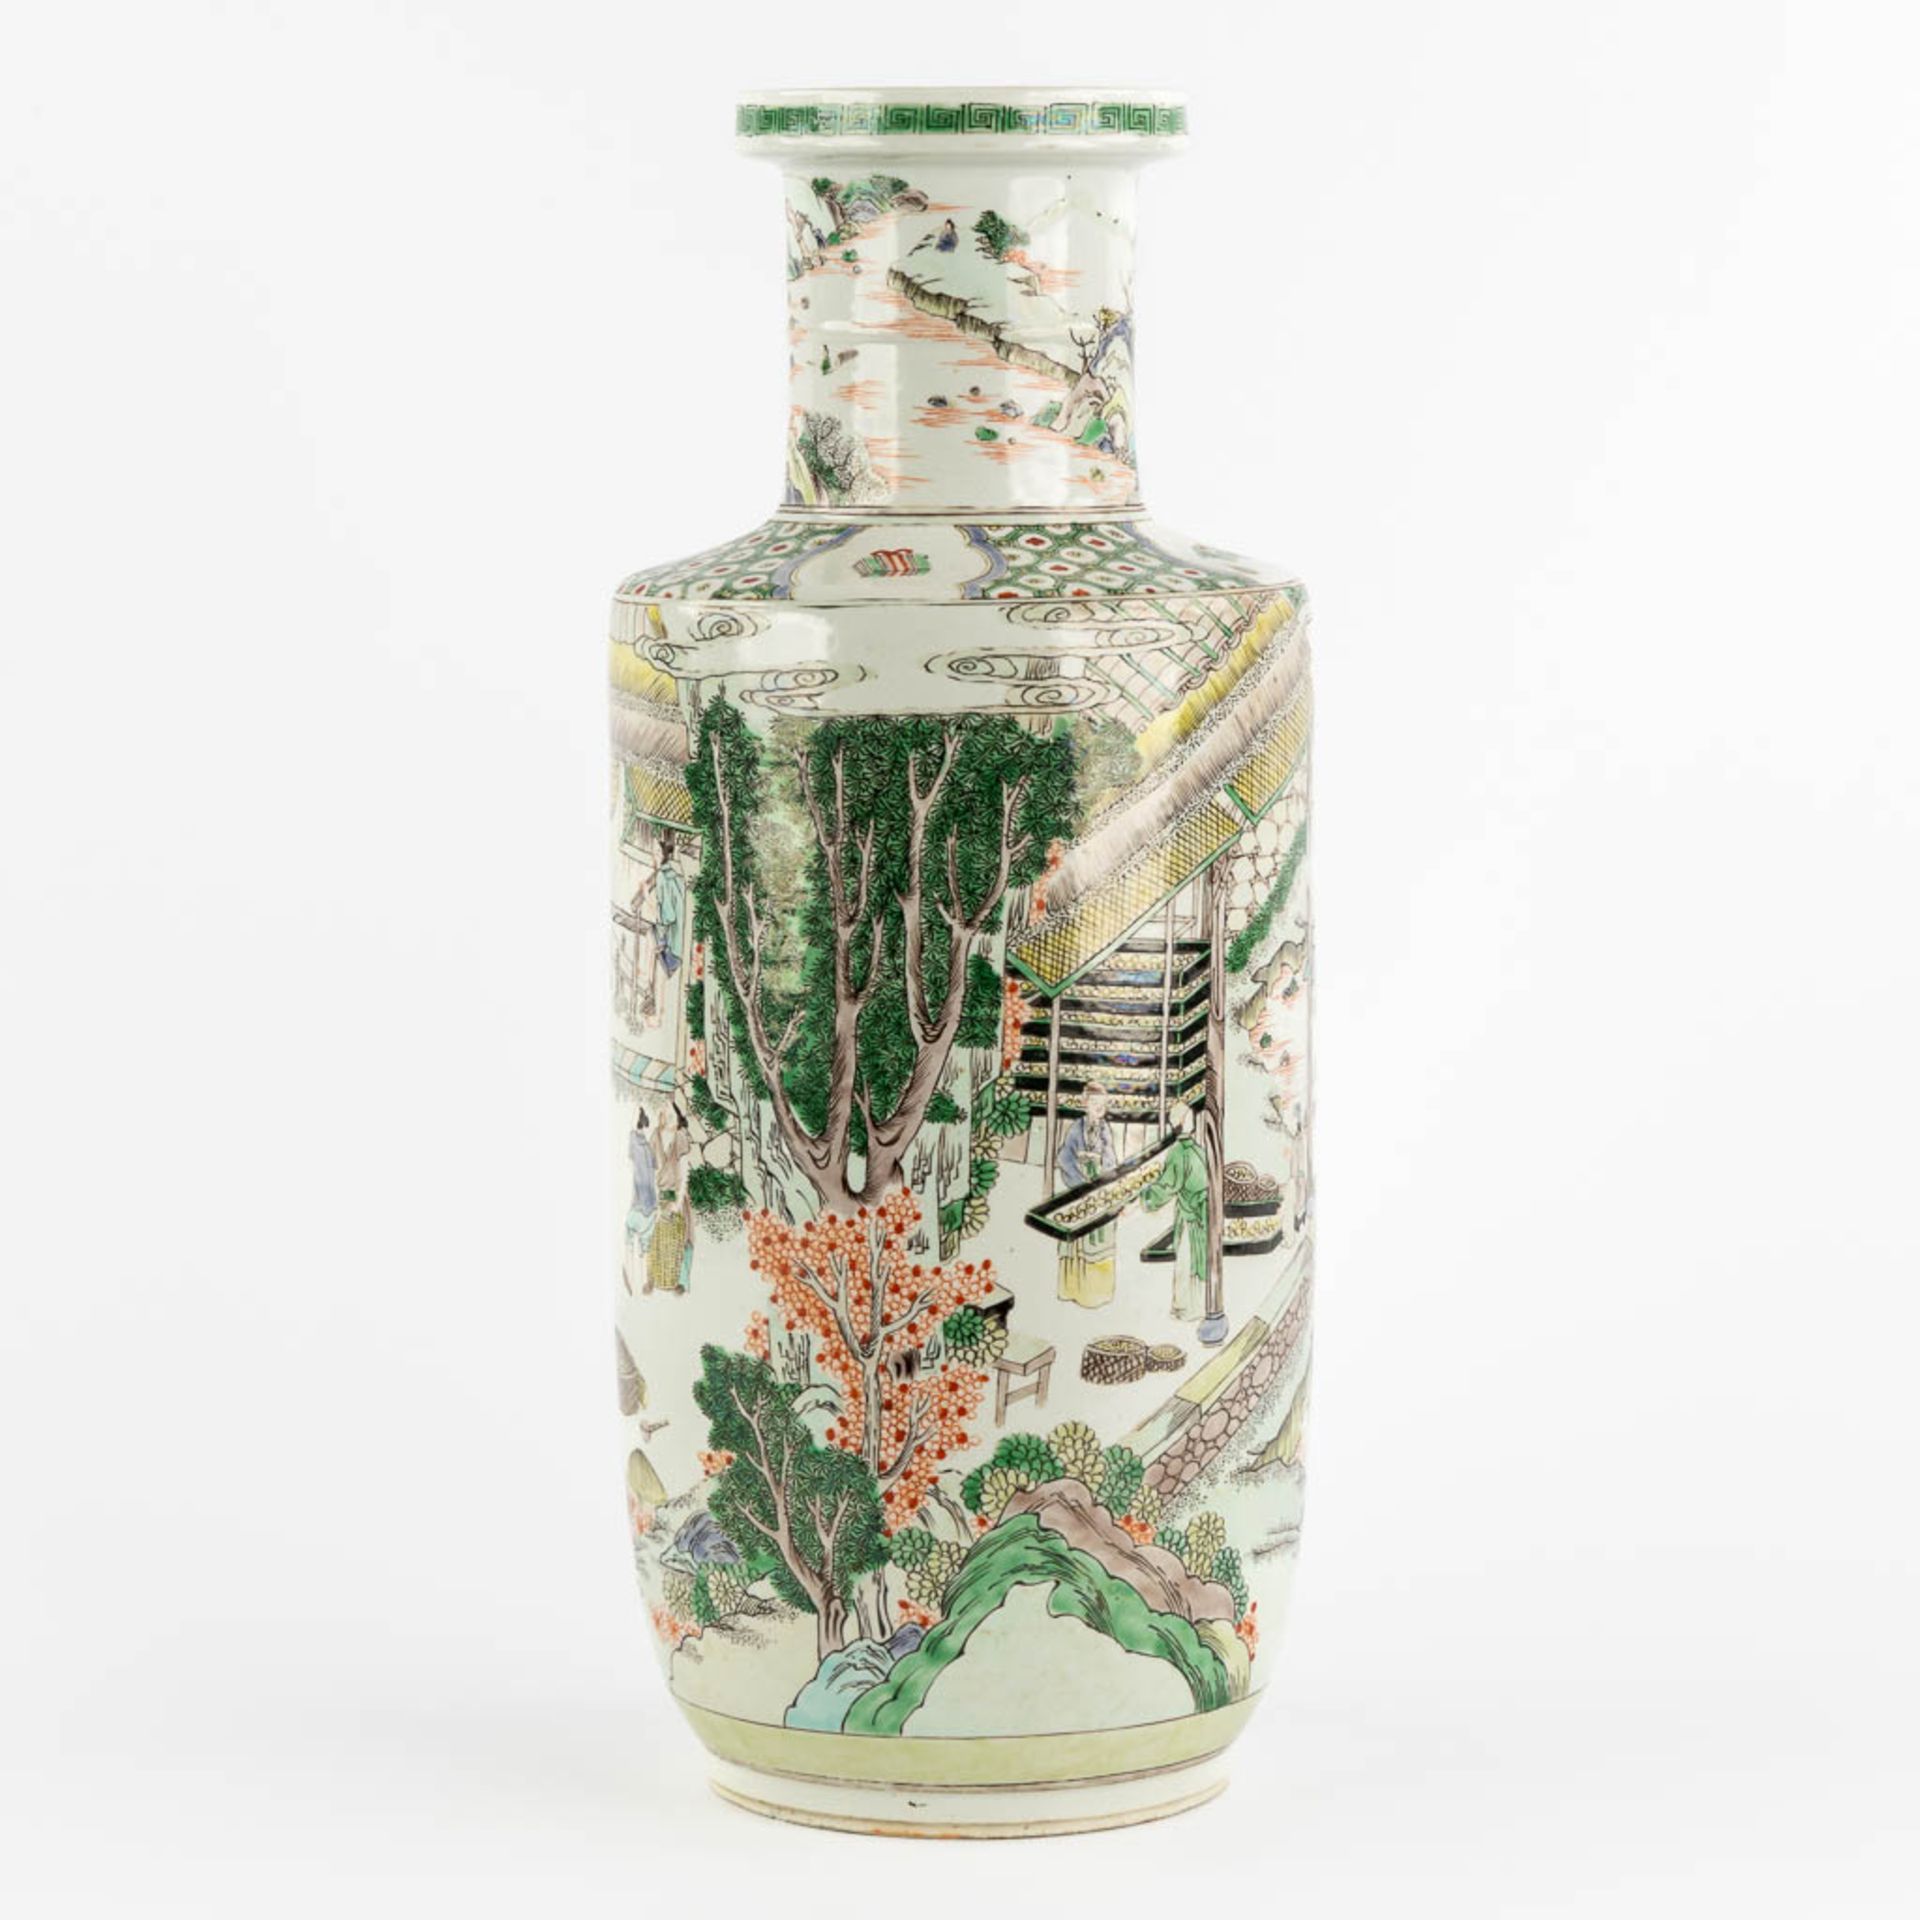 A Chinese Famille Verte 'Roulleau' vase with scènes of rice production. (H:46 x D:18 cm) - Image 6 of 13